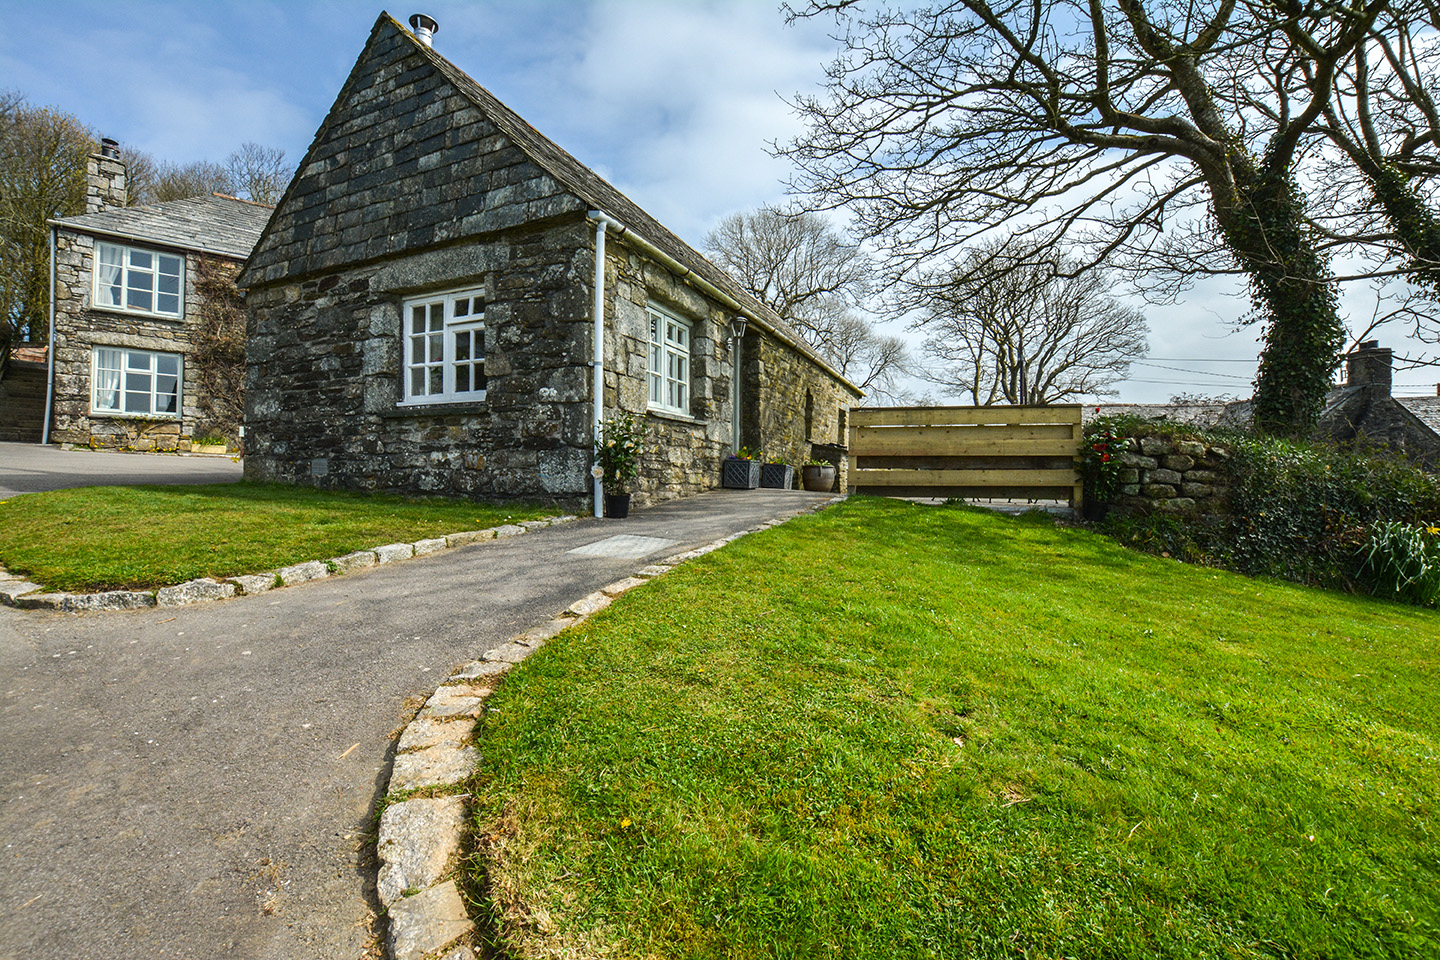 The outside of Jingles luxury self catering holiday cottage at Penrose Burden in North Cornwall near Bodmin Moor03.jpg